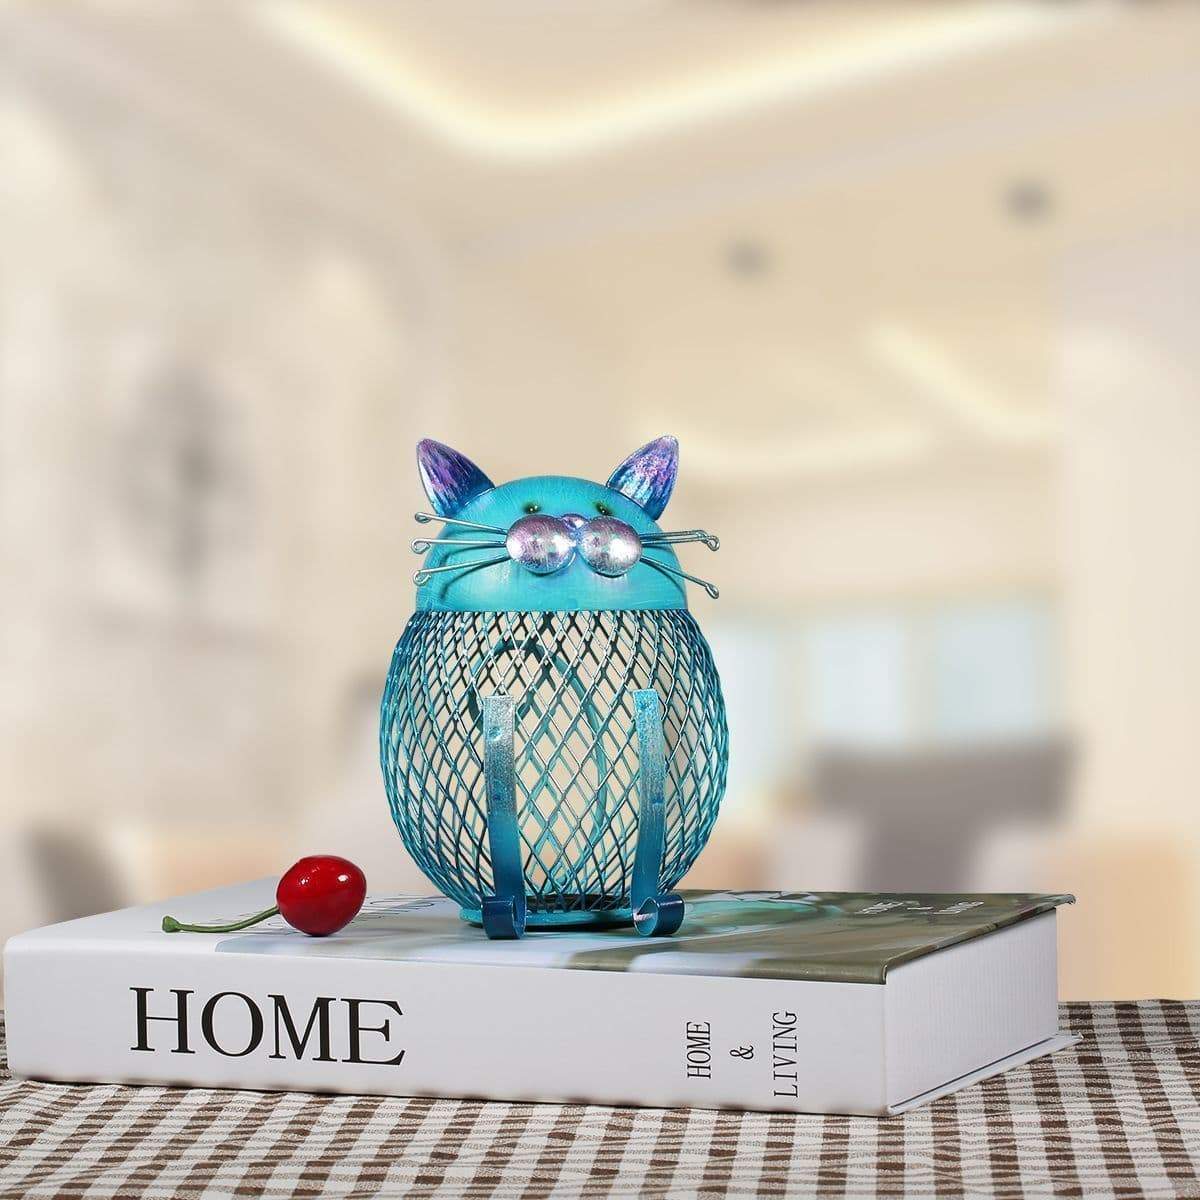 This unique metal kitty bank is painted in a vibrant blue color that stands out and gives your space an artistic touch.